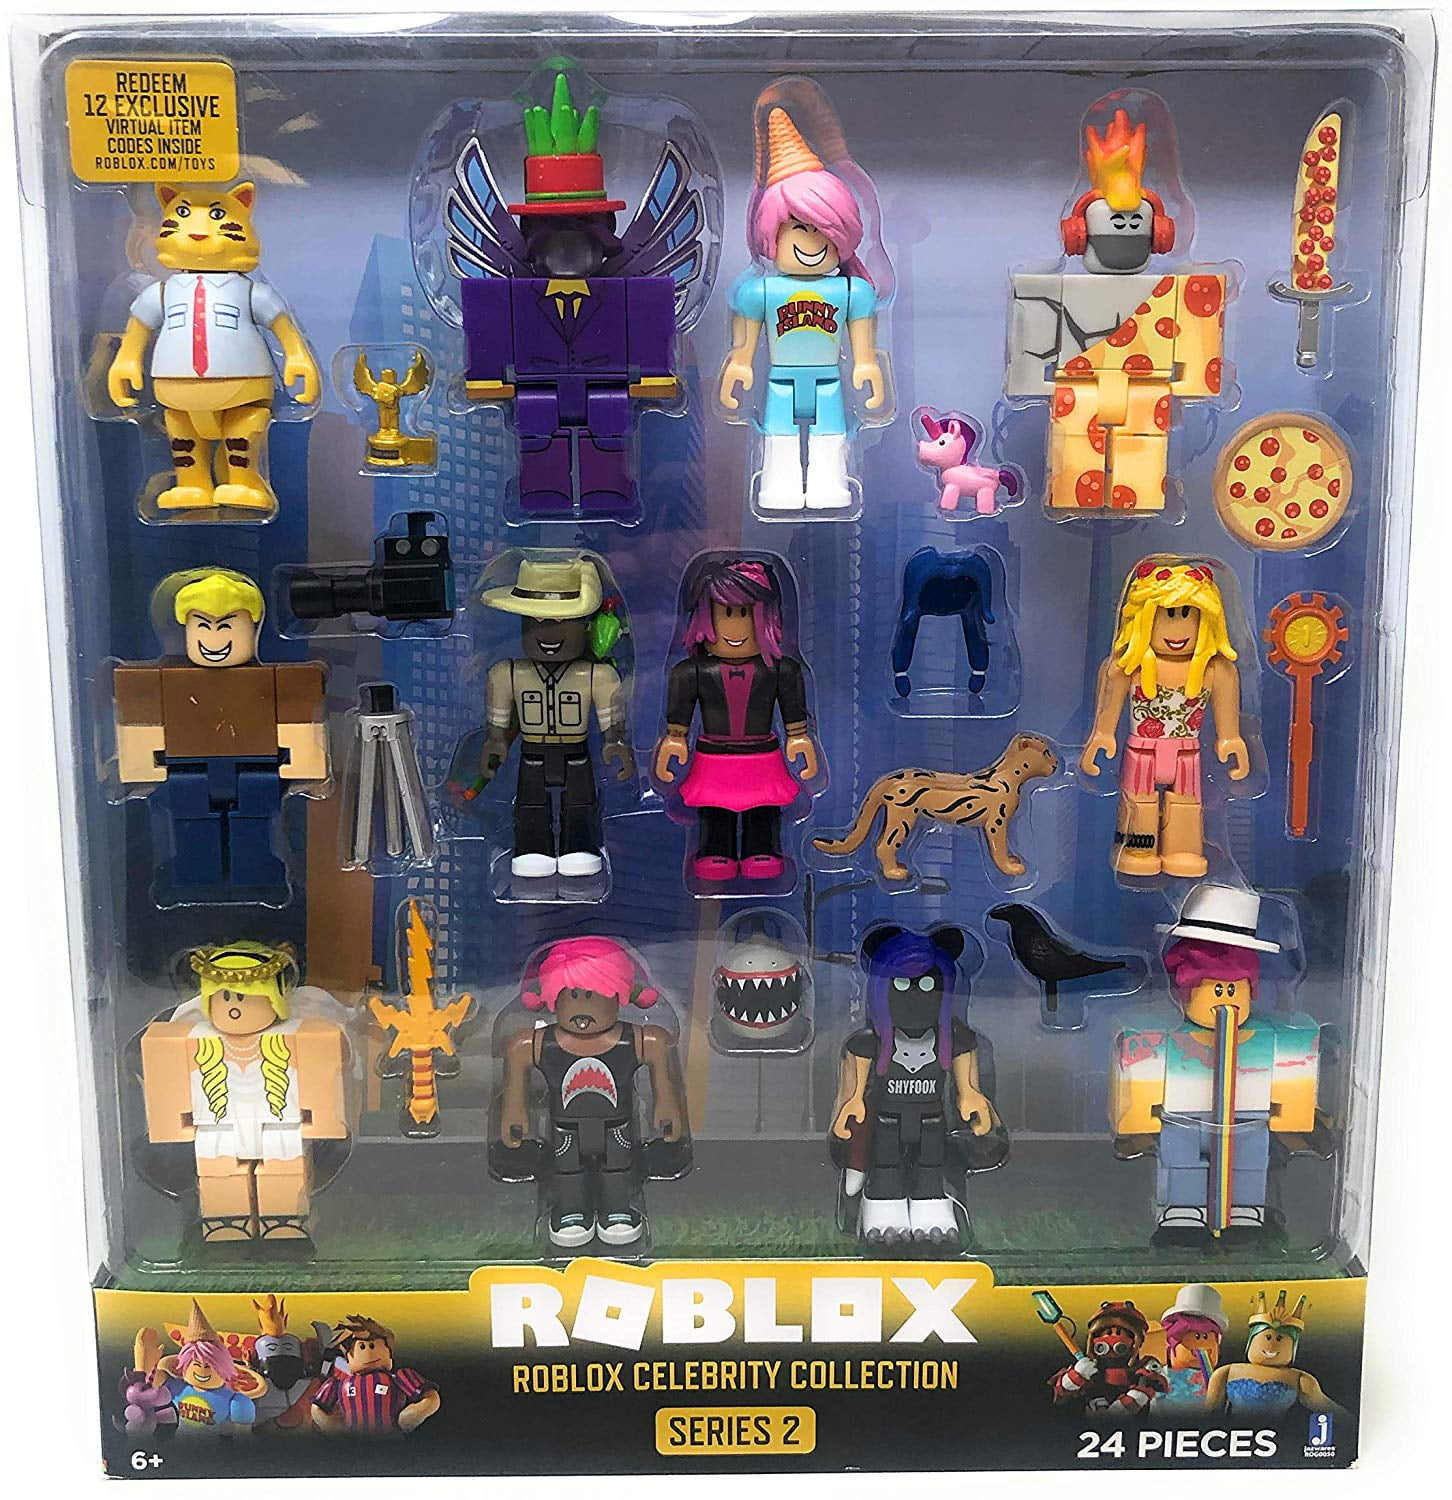 Roblox Series 2 Roblox Celebrity Collection 24 Piece Set Walmart Com Walmart Com - roblox toys series 2 codes